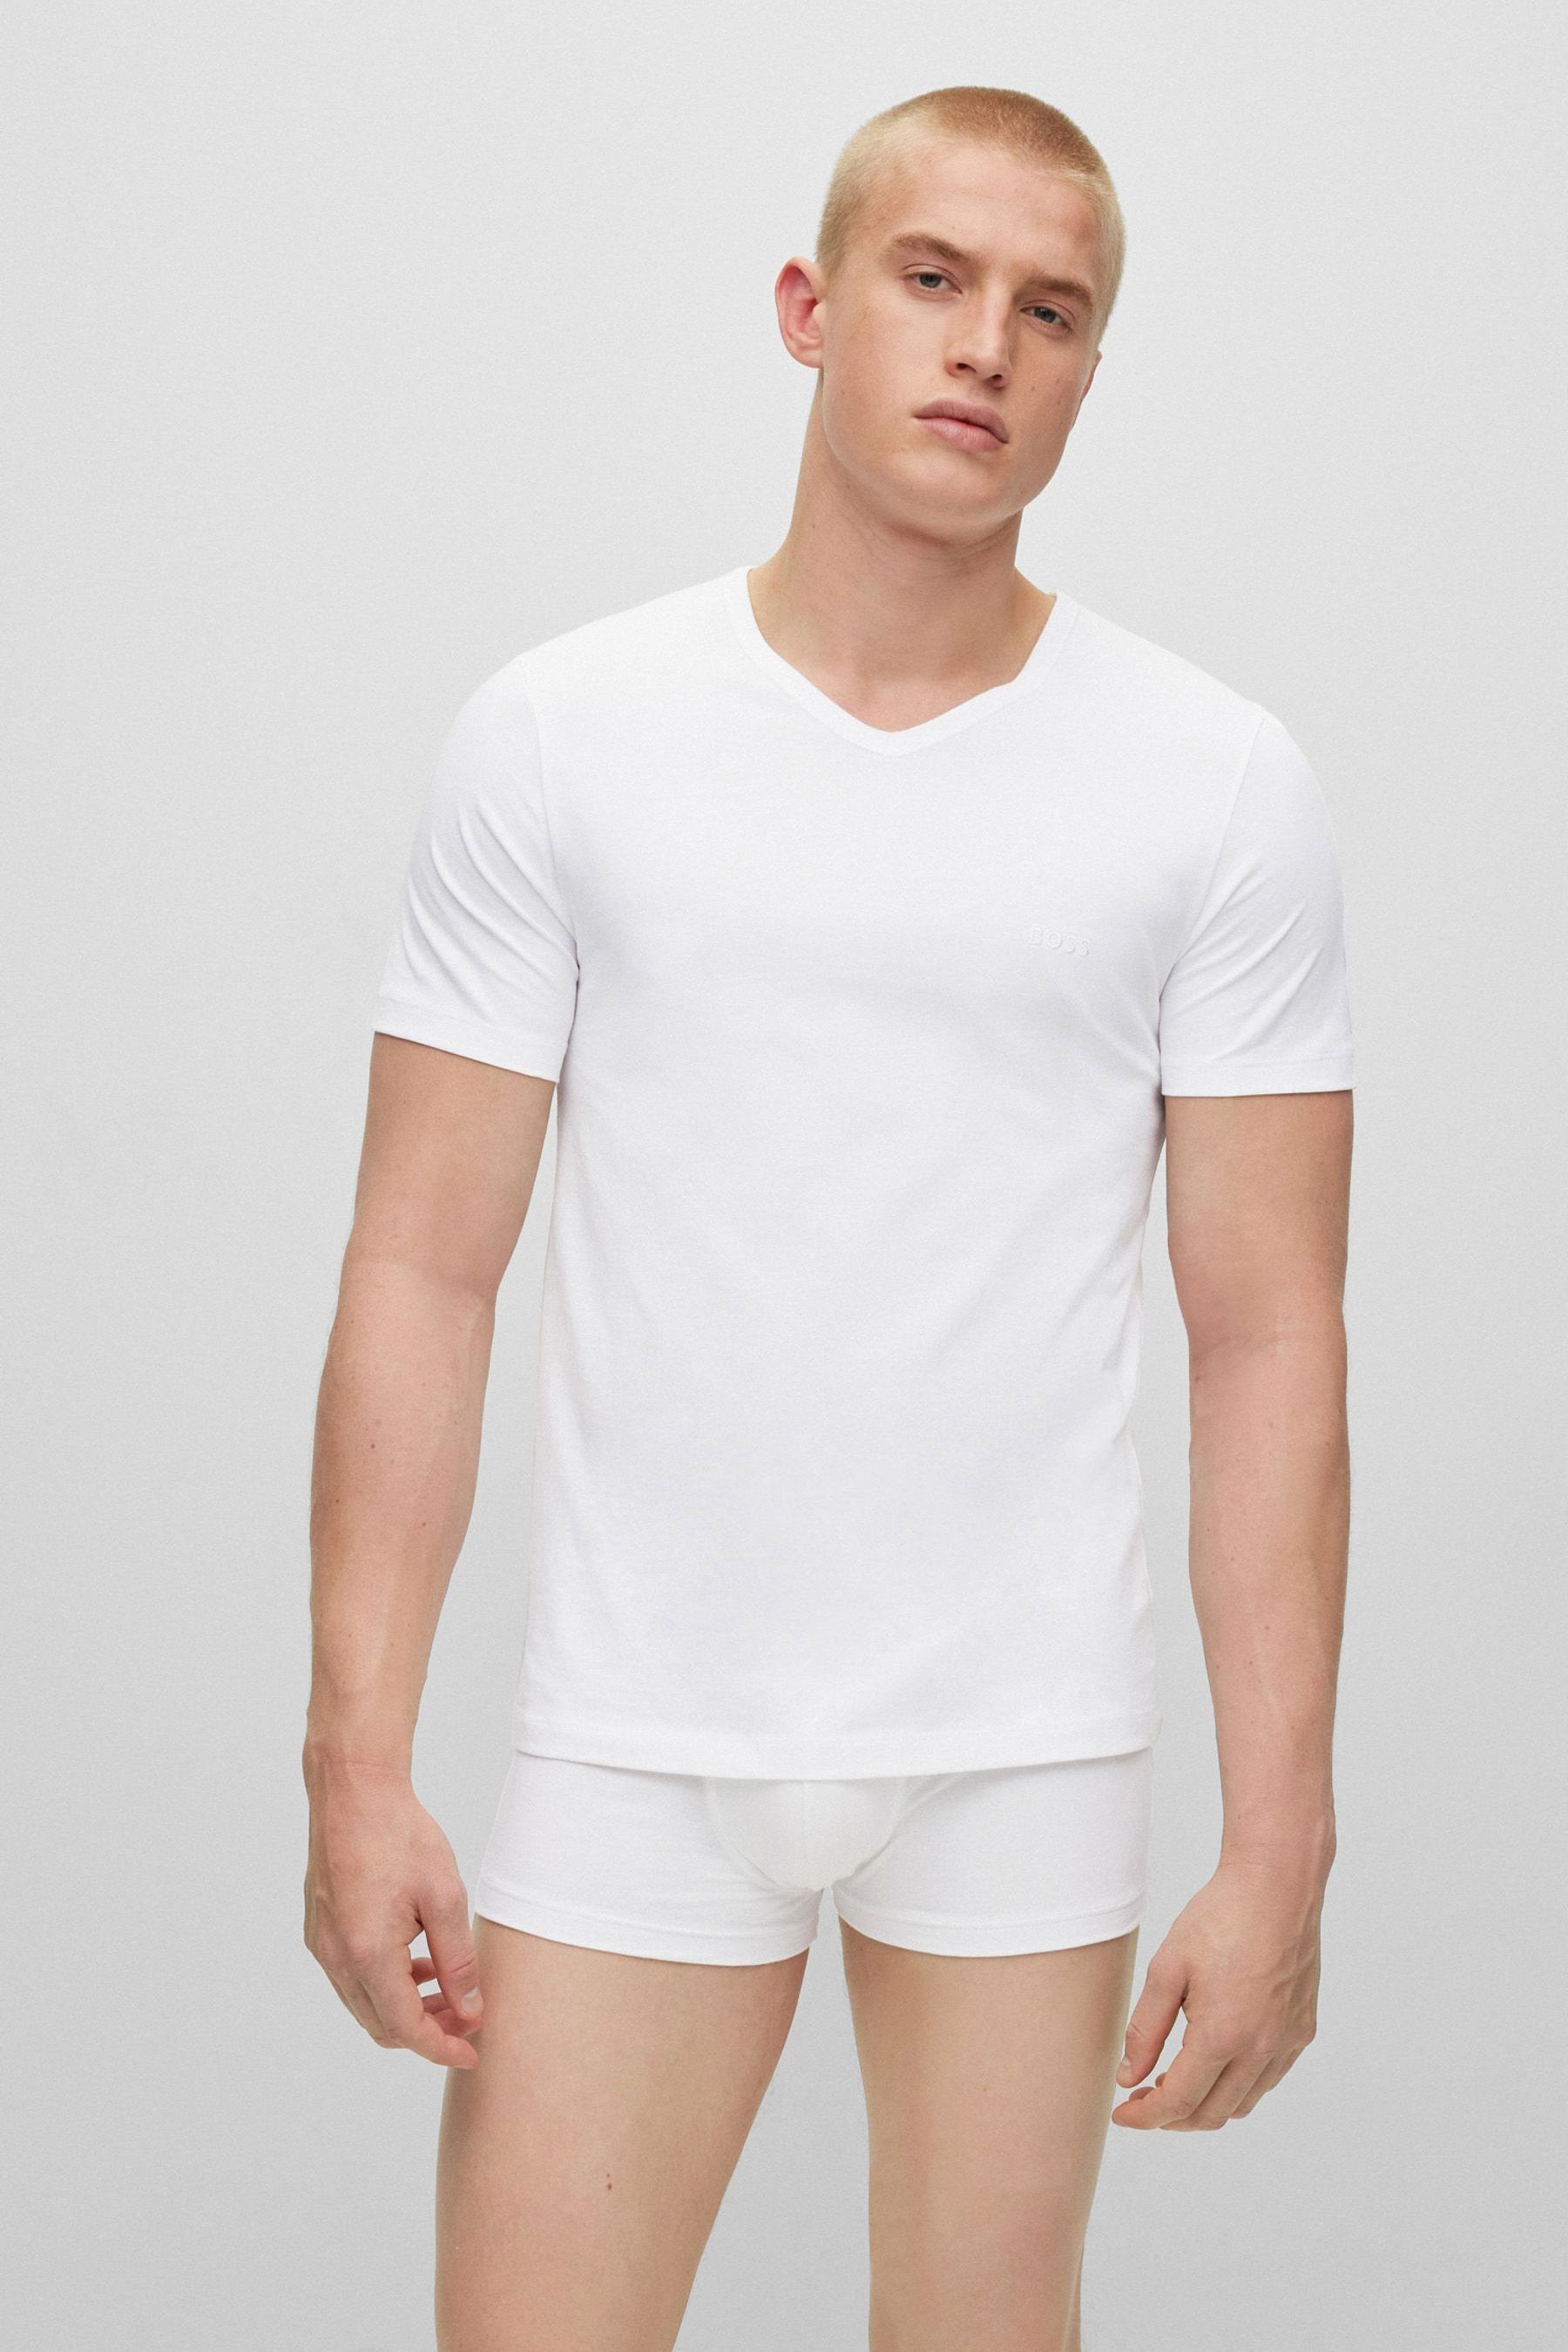 Buy BOSS White Classic V-Neck T-Shirts 3 Pack from the Next UK online shop